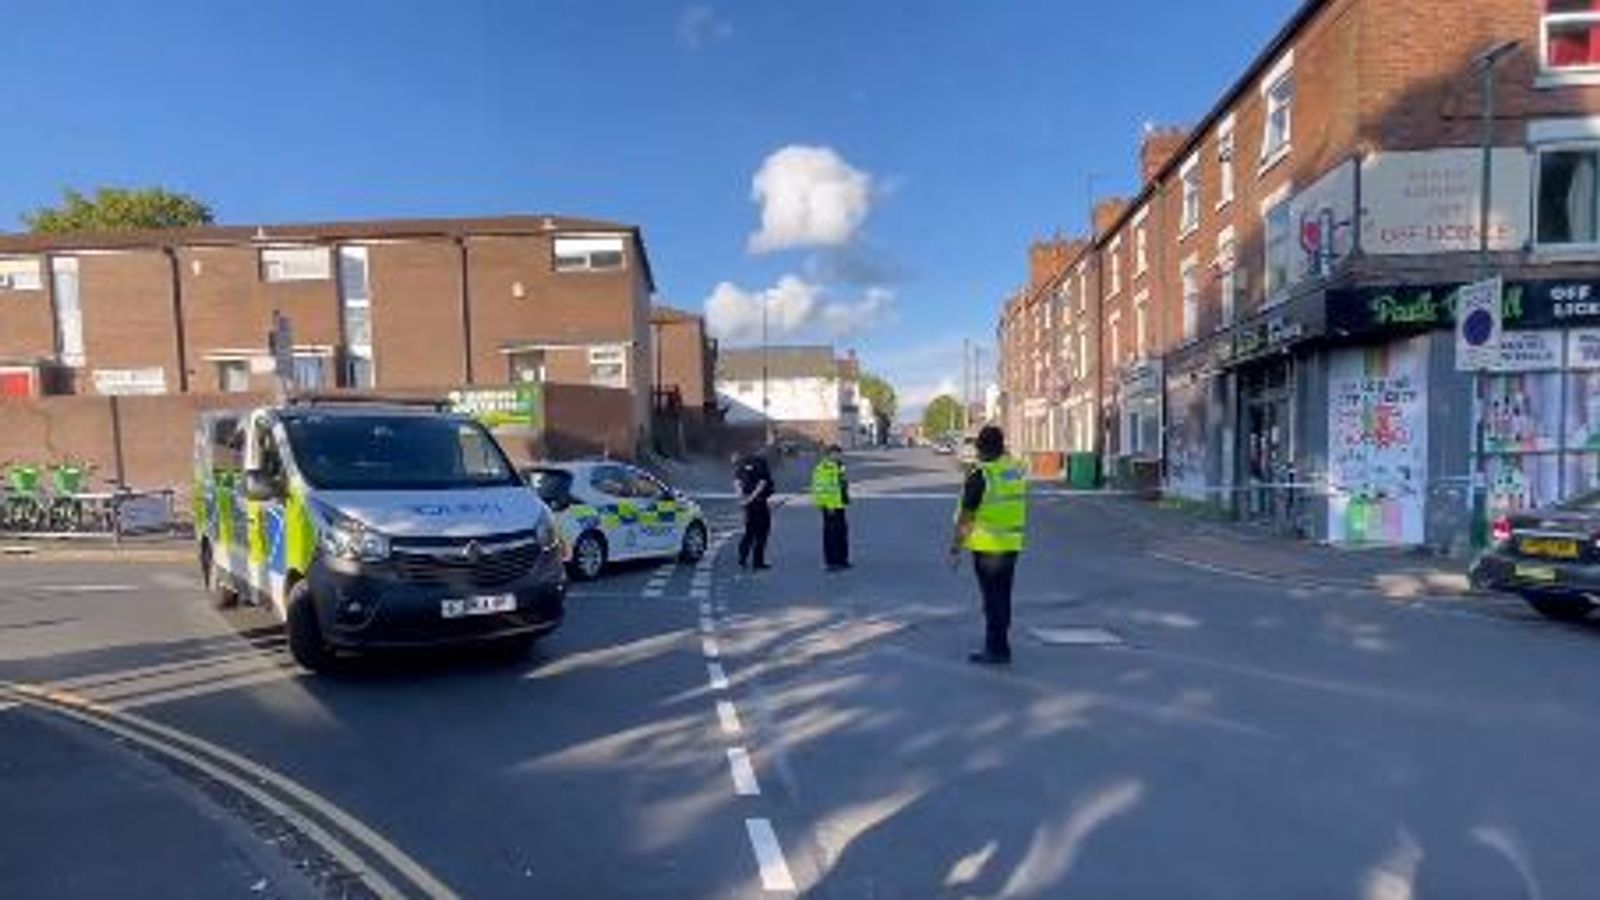 Nottingham: Suspicious package destroyed and second being investigated in 'major incident'